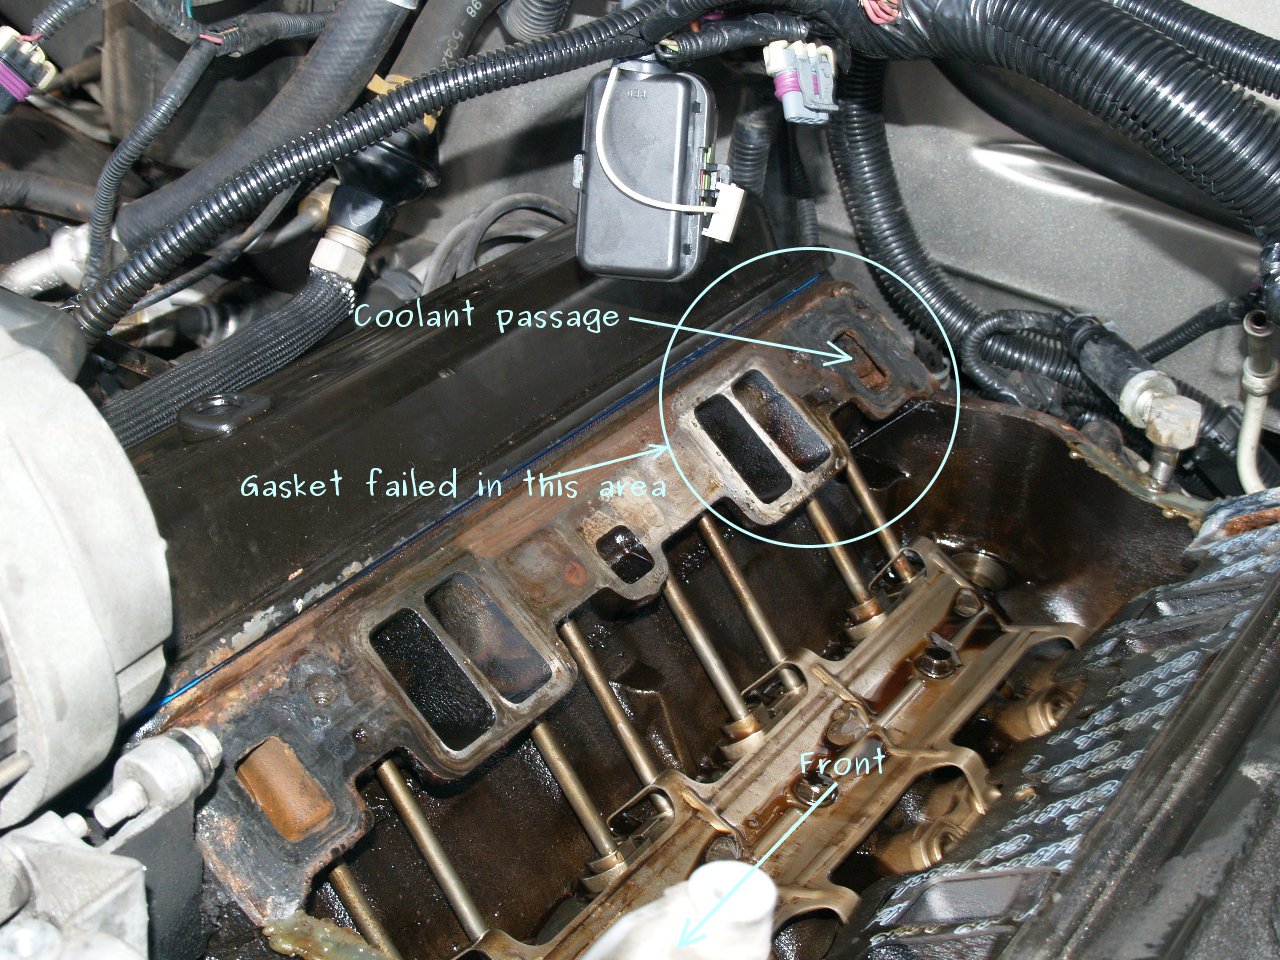 See P159E in engine